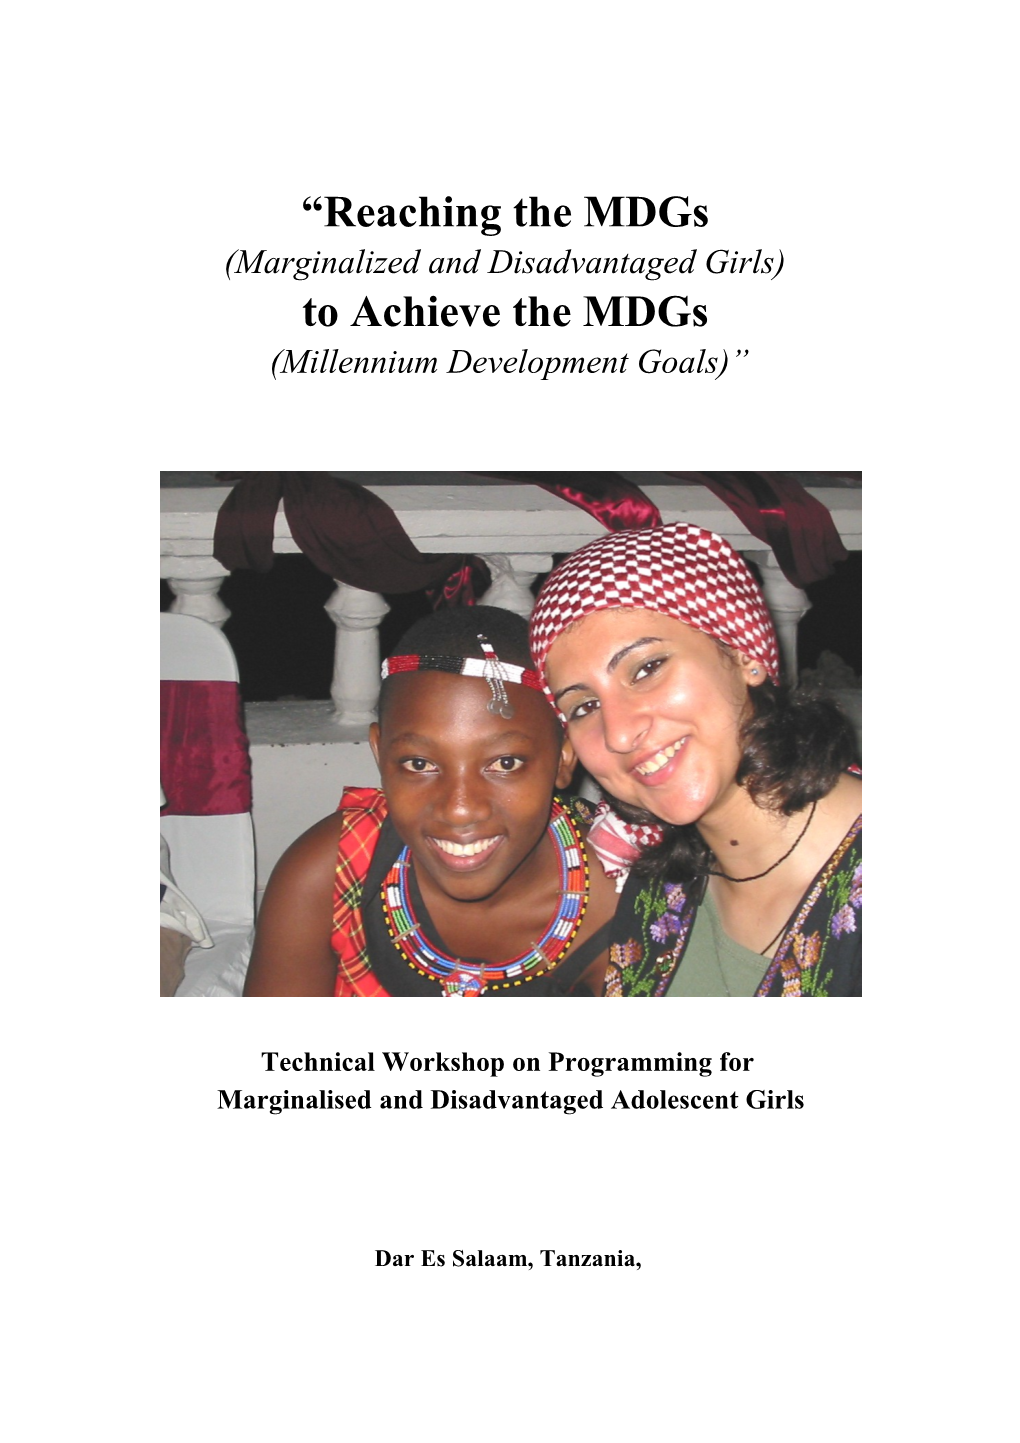 Reaching Marginalized And Disadvantaged Girls (Mdgs) To Reach The Millennium Development Goals (Mdgs): Technical Workshop On P